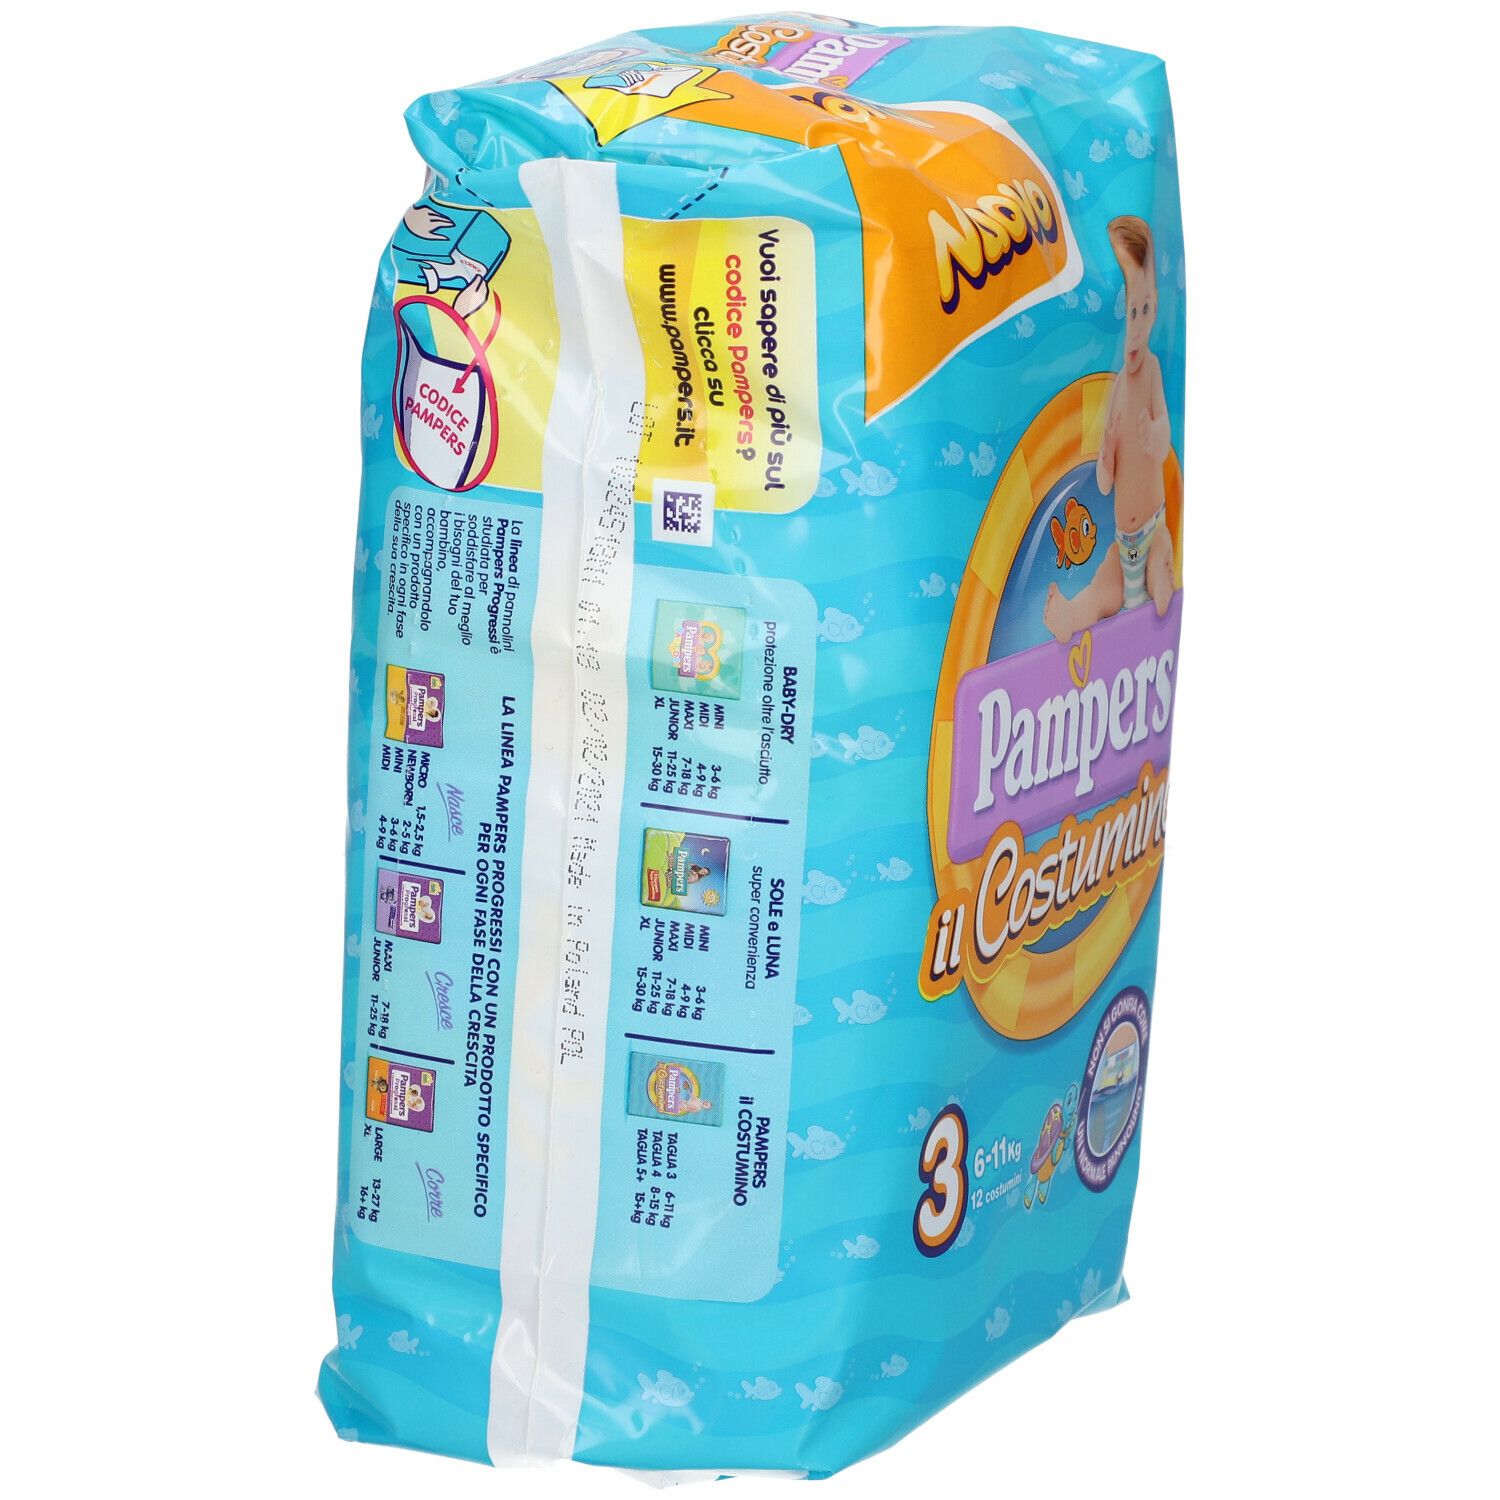 Pampers Il Costumino 3 (6-11 kg)